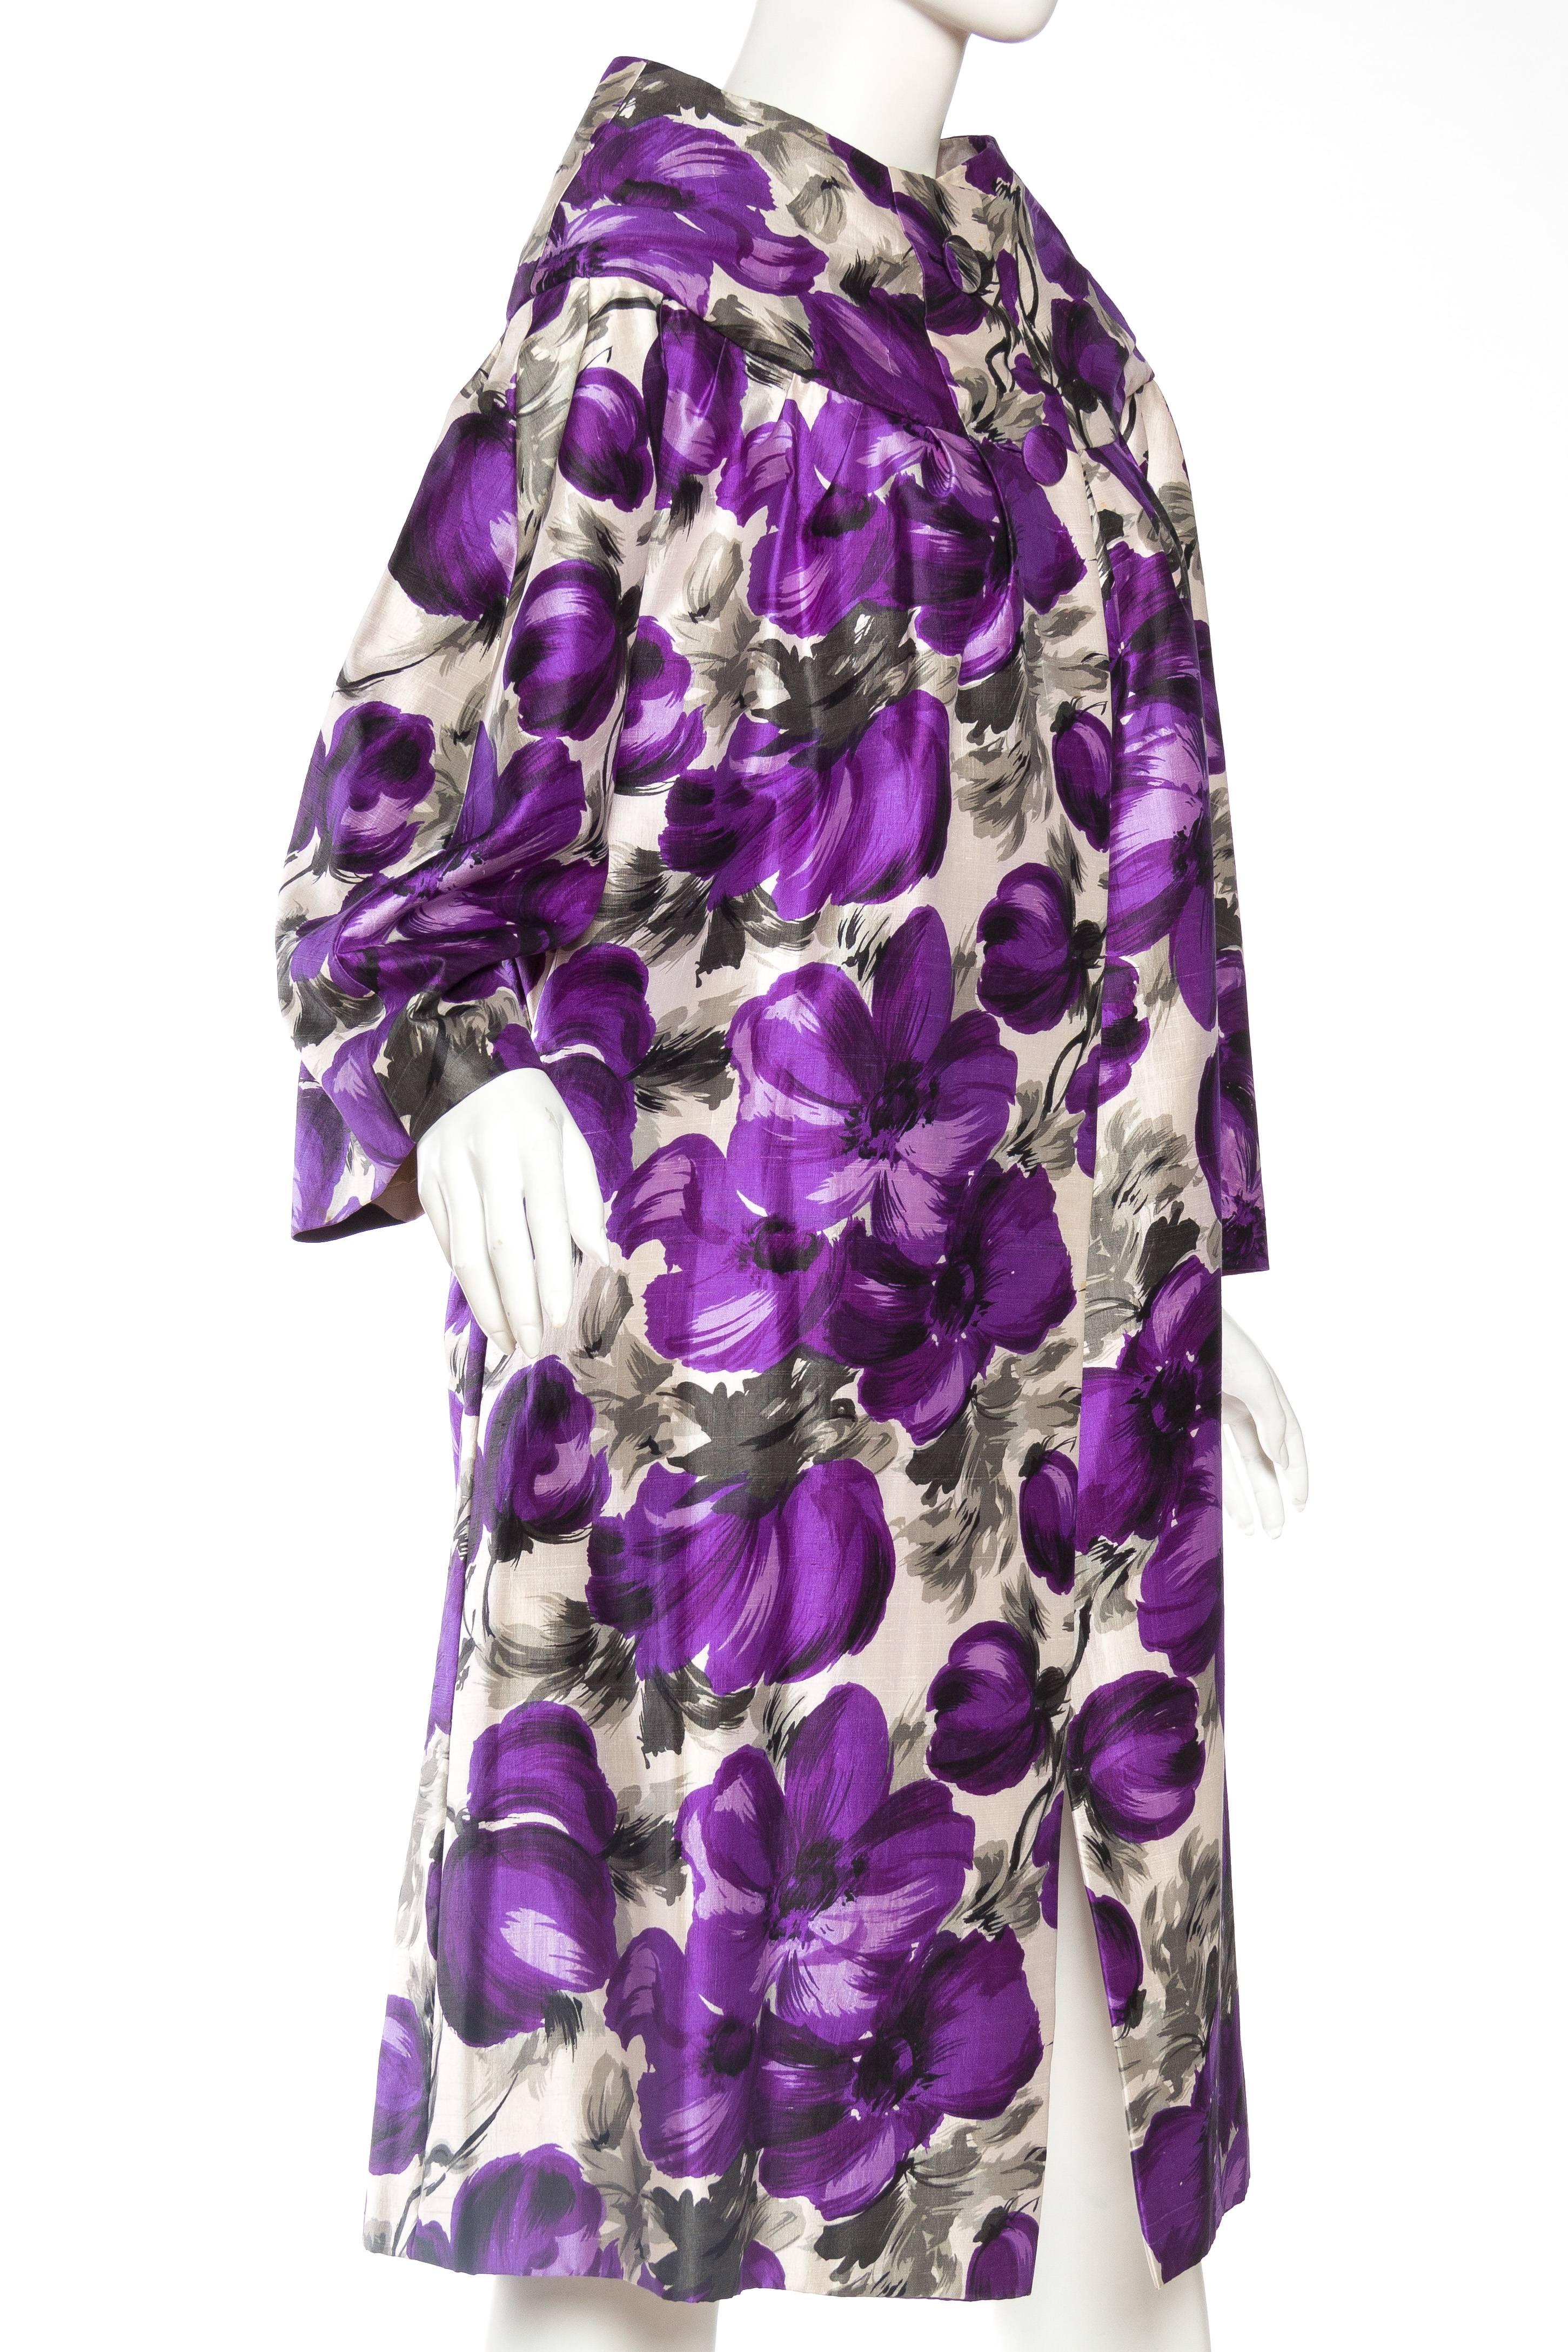 Women's Gorgeous Floral Printed Silk Lightweight Coat from the 1950s